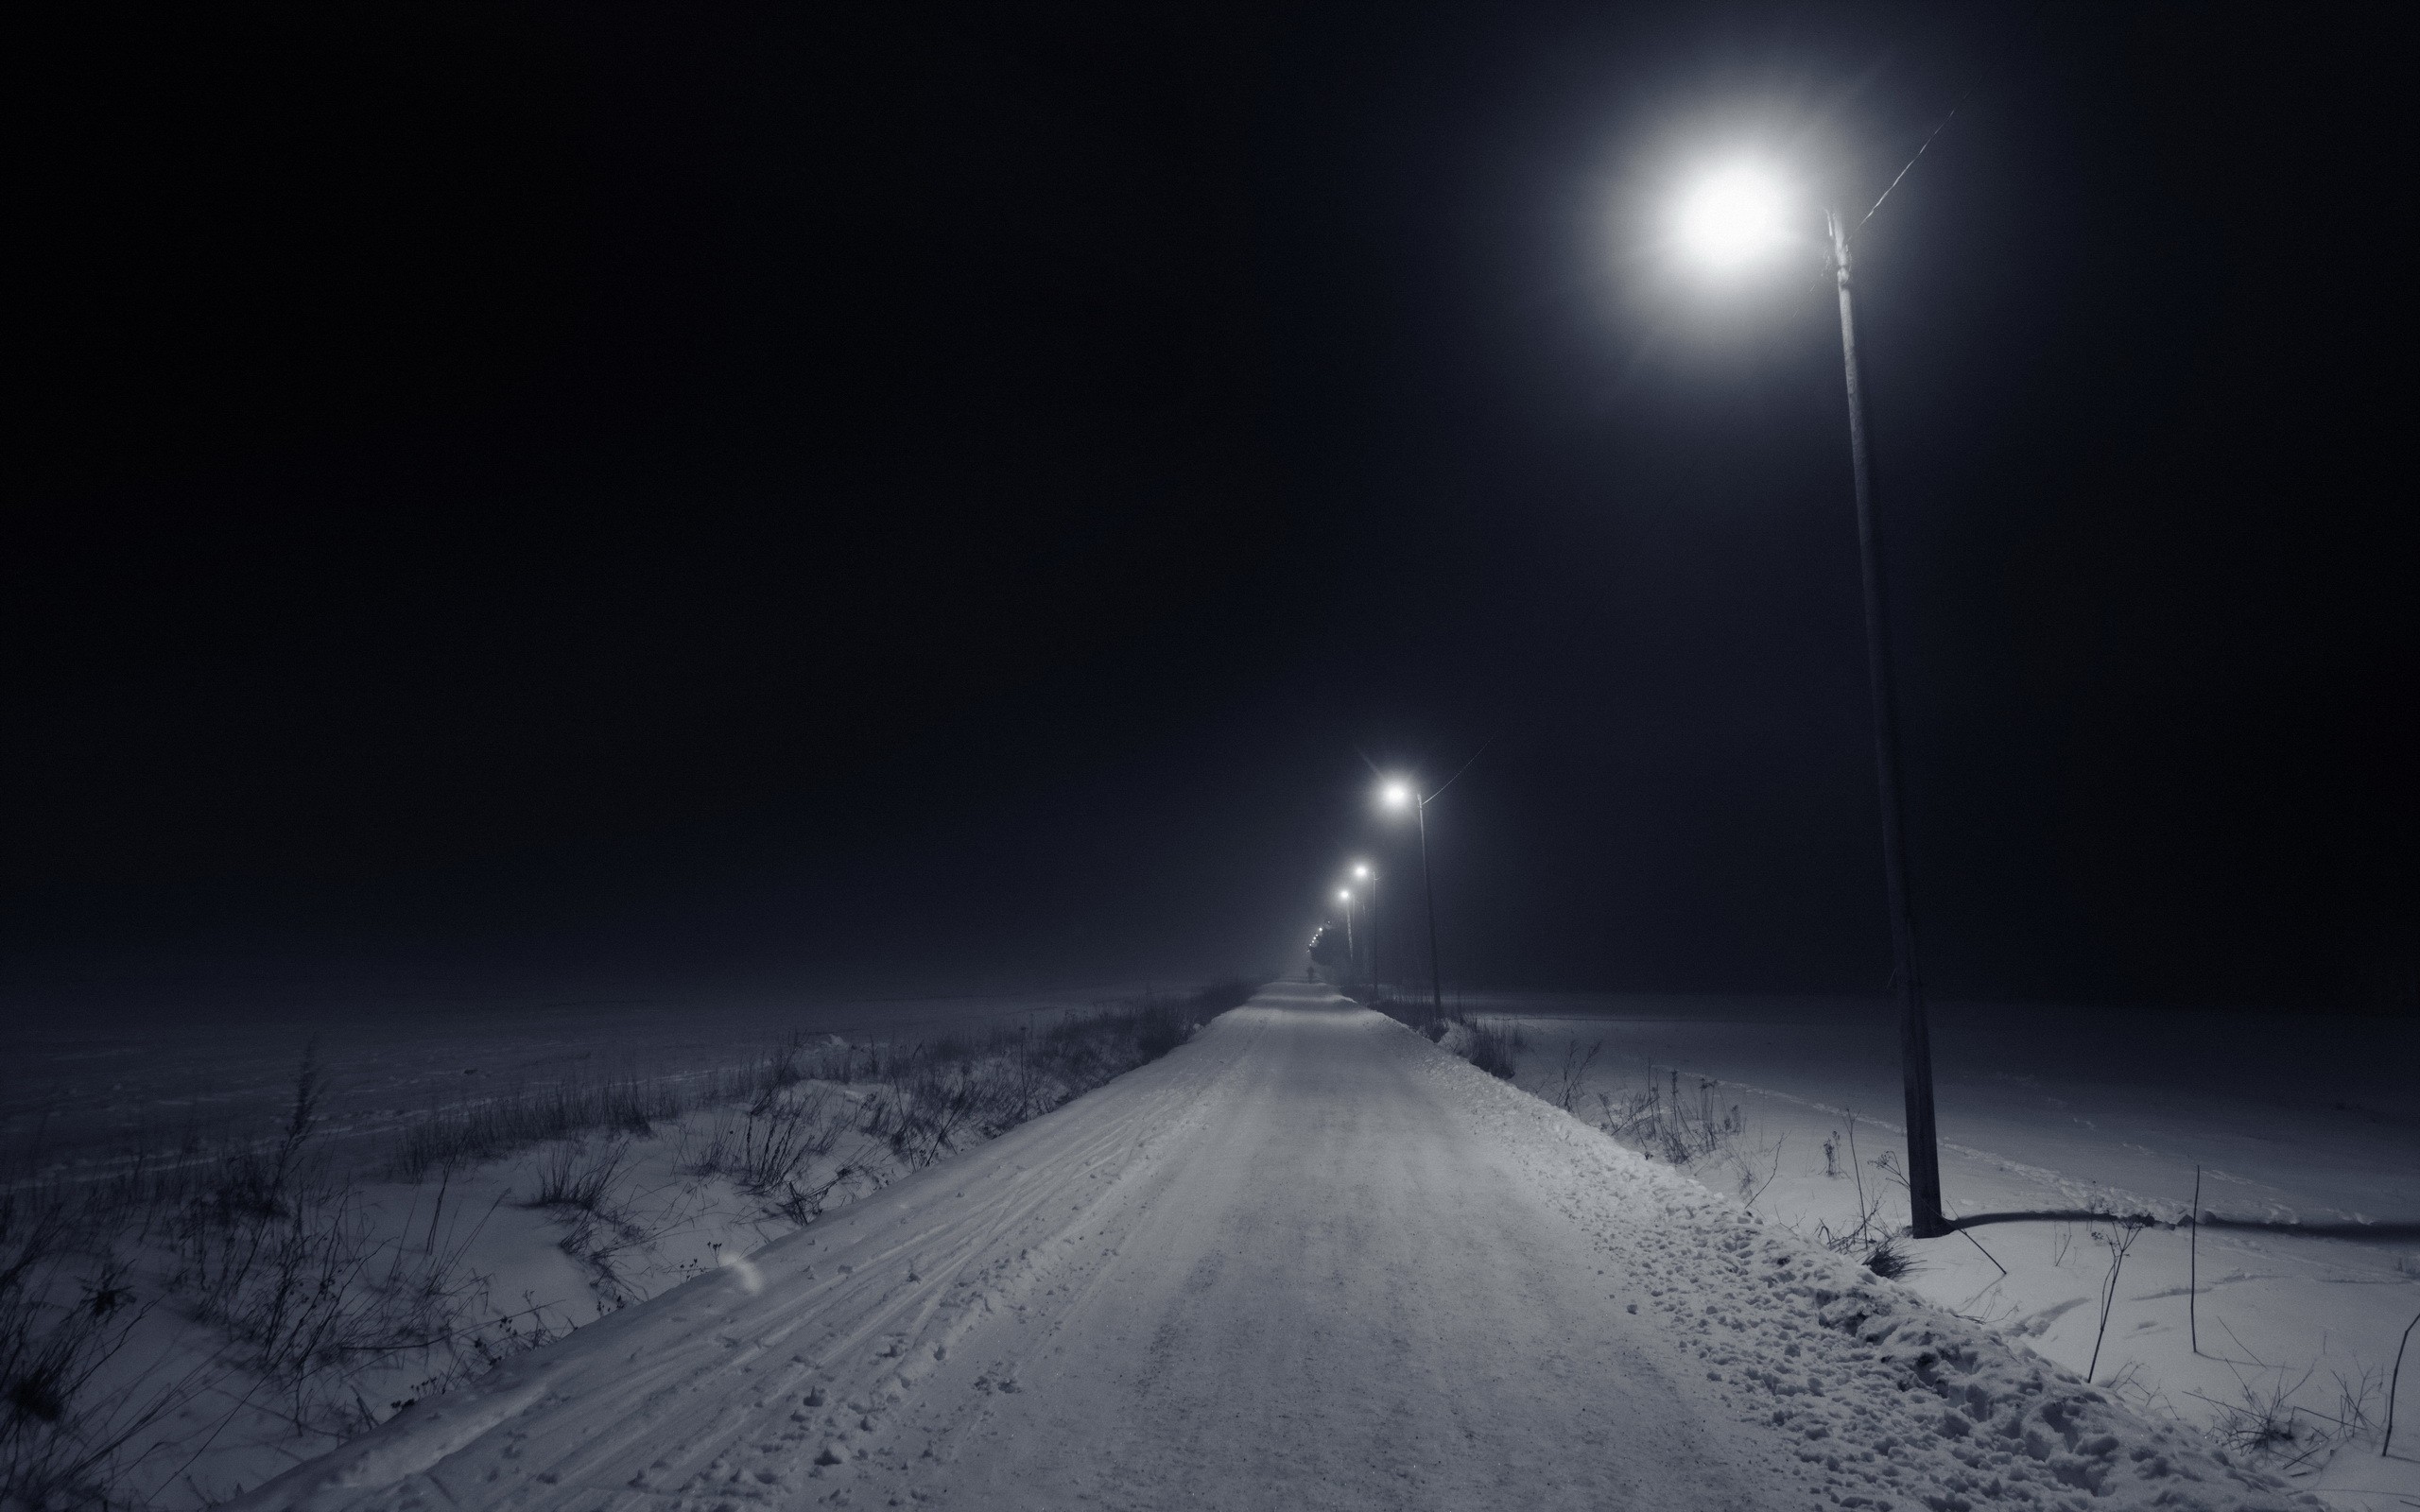 General 2560x1600 night winter road lamp snow dark outdoors cold long road low light